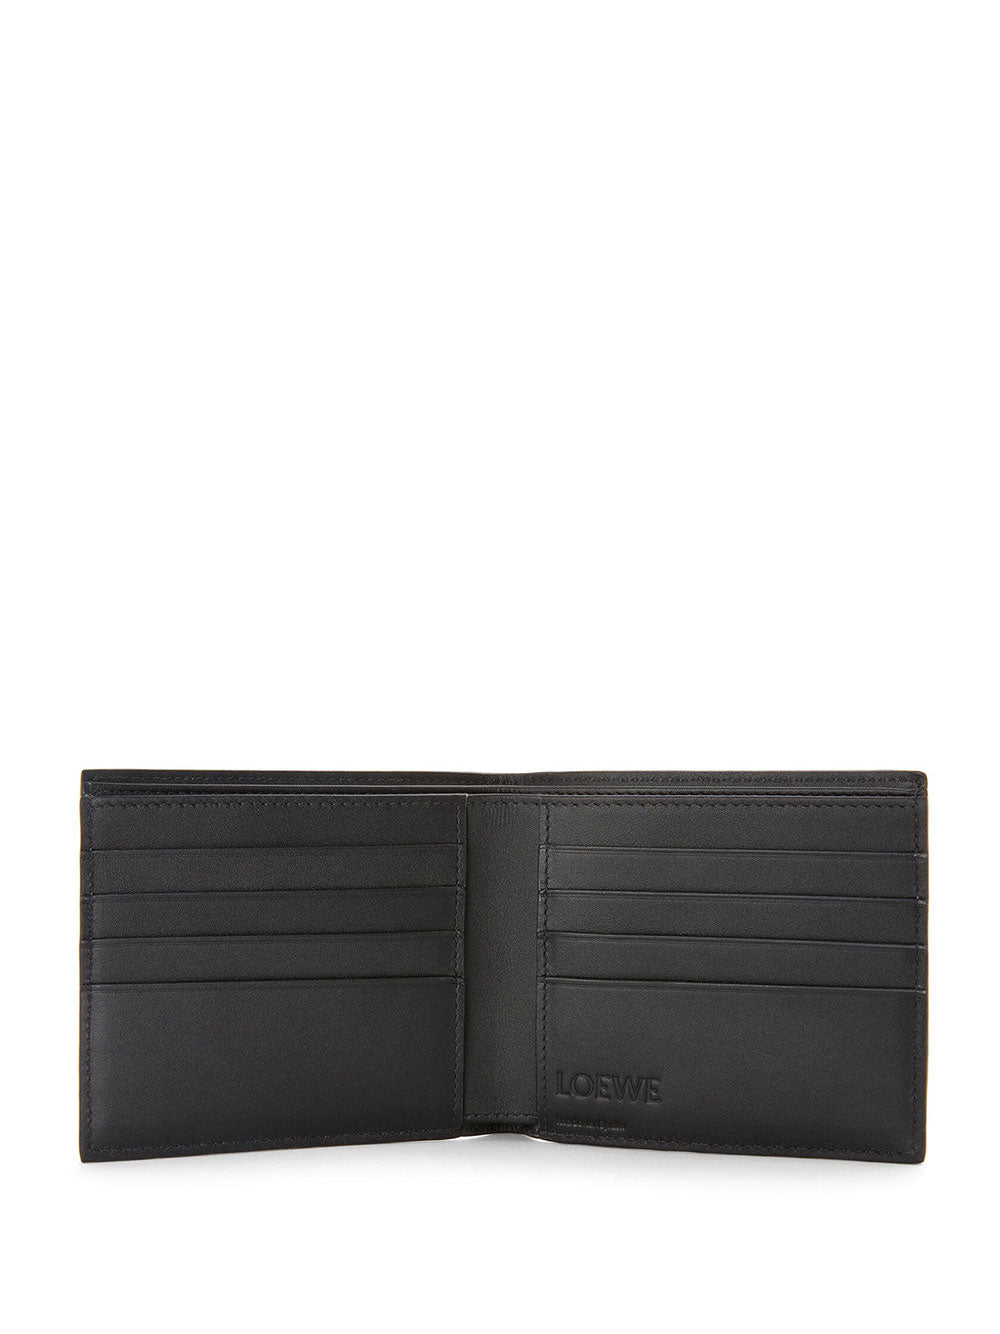 Grained calf leather wallet